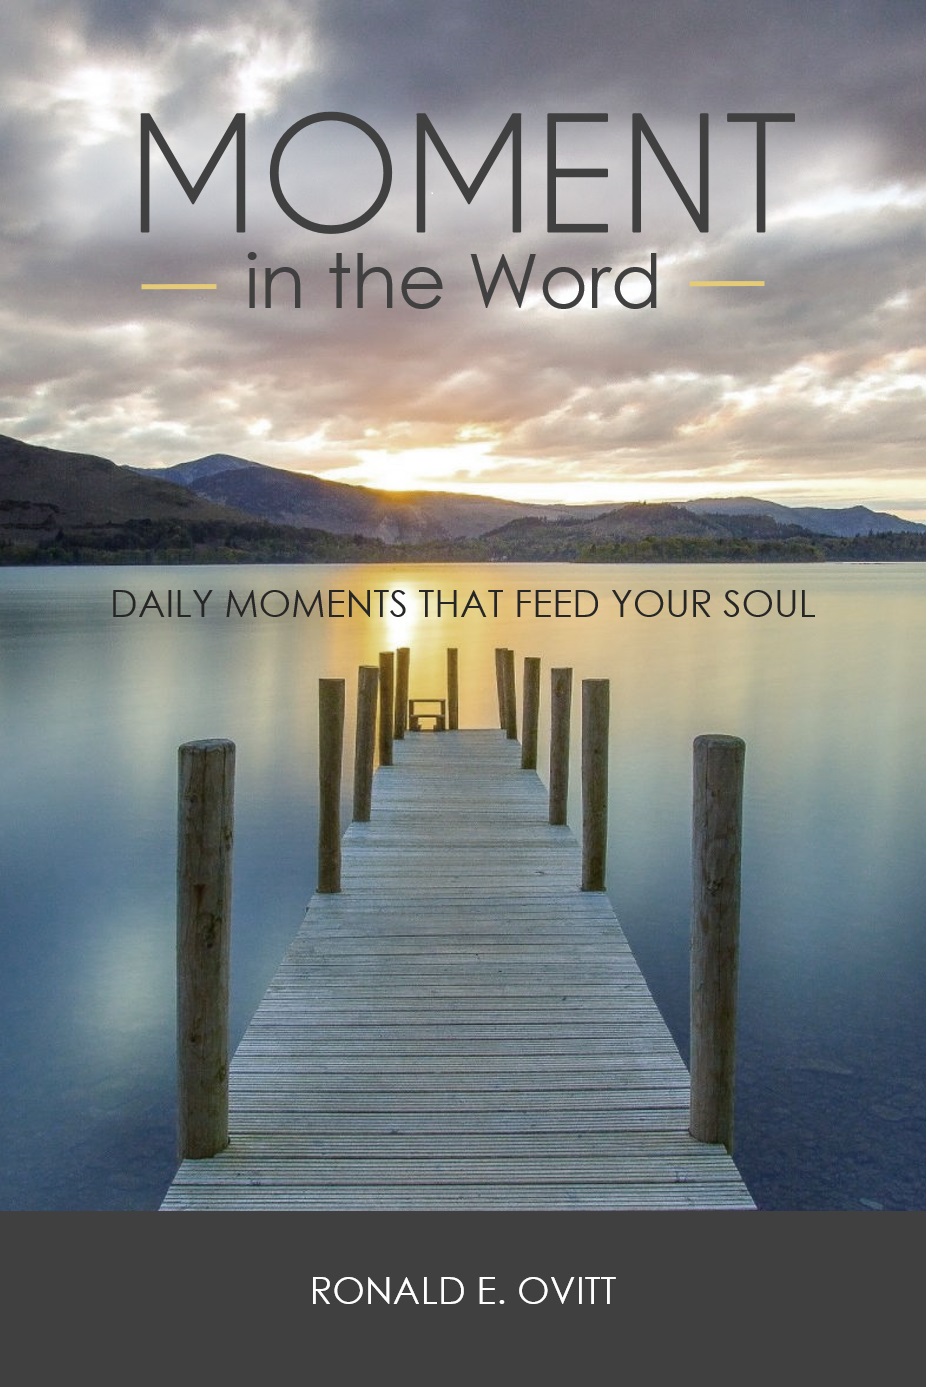 Cover of "Moment in the Word" book